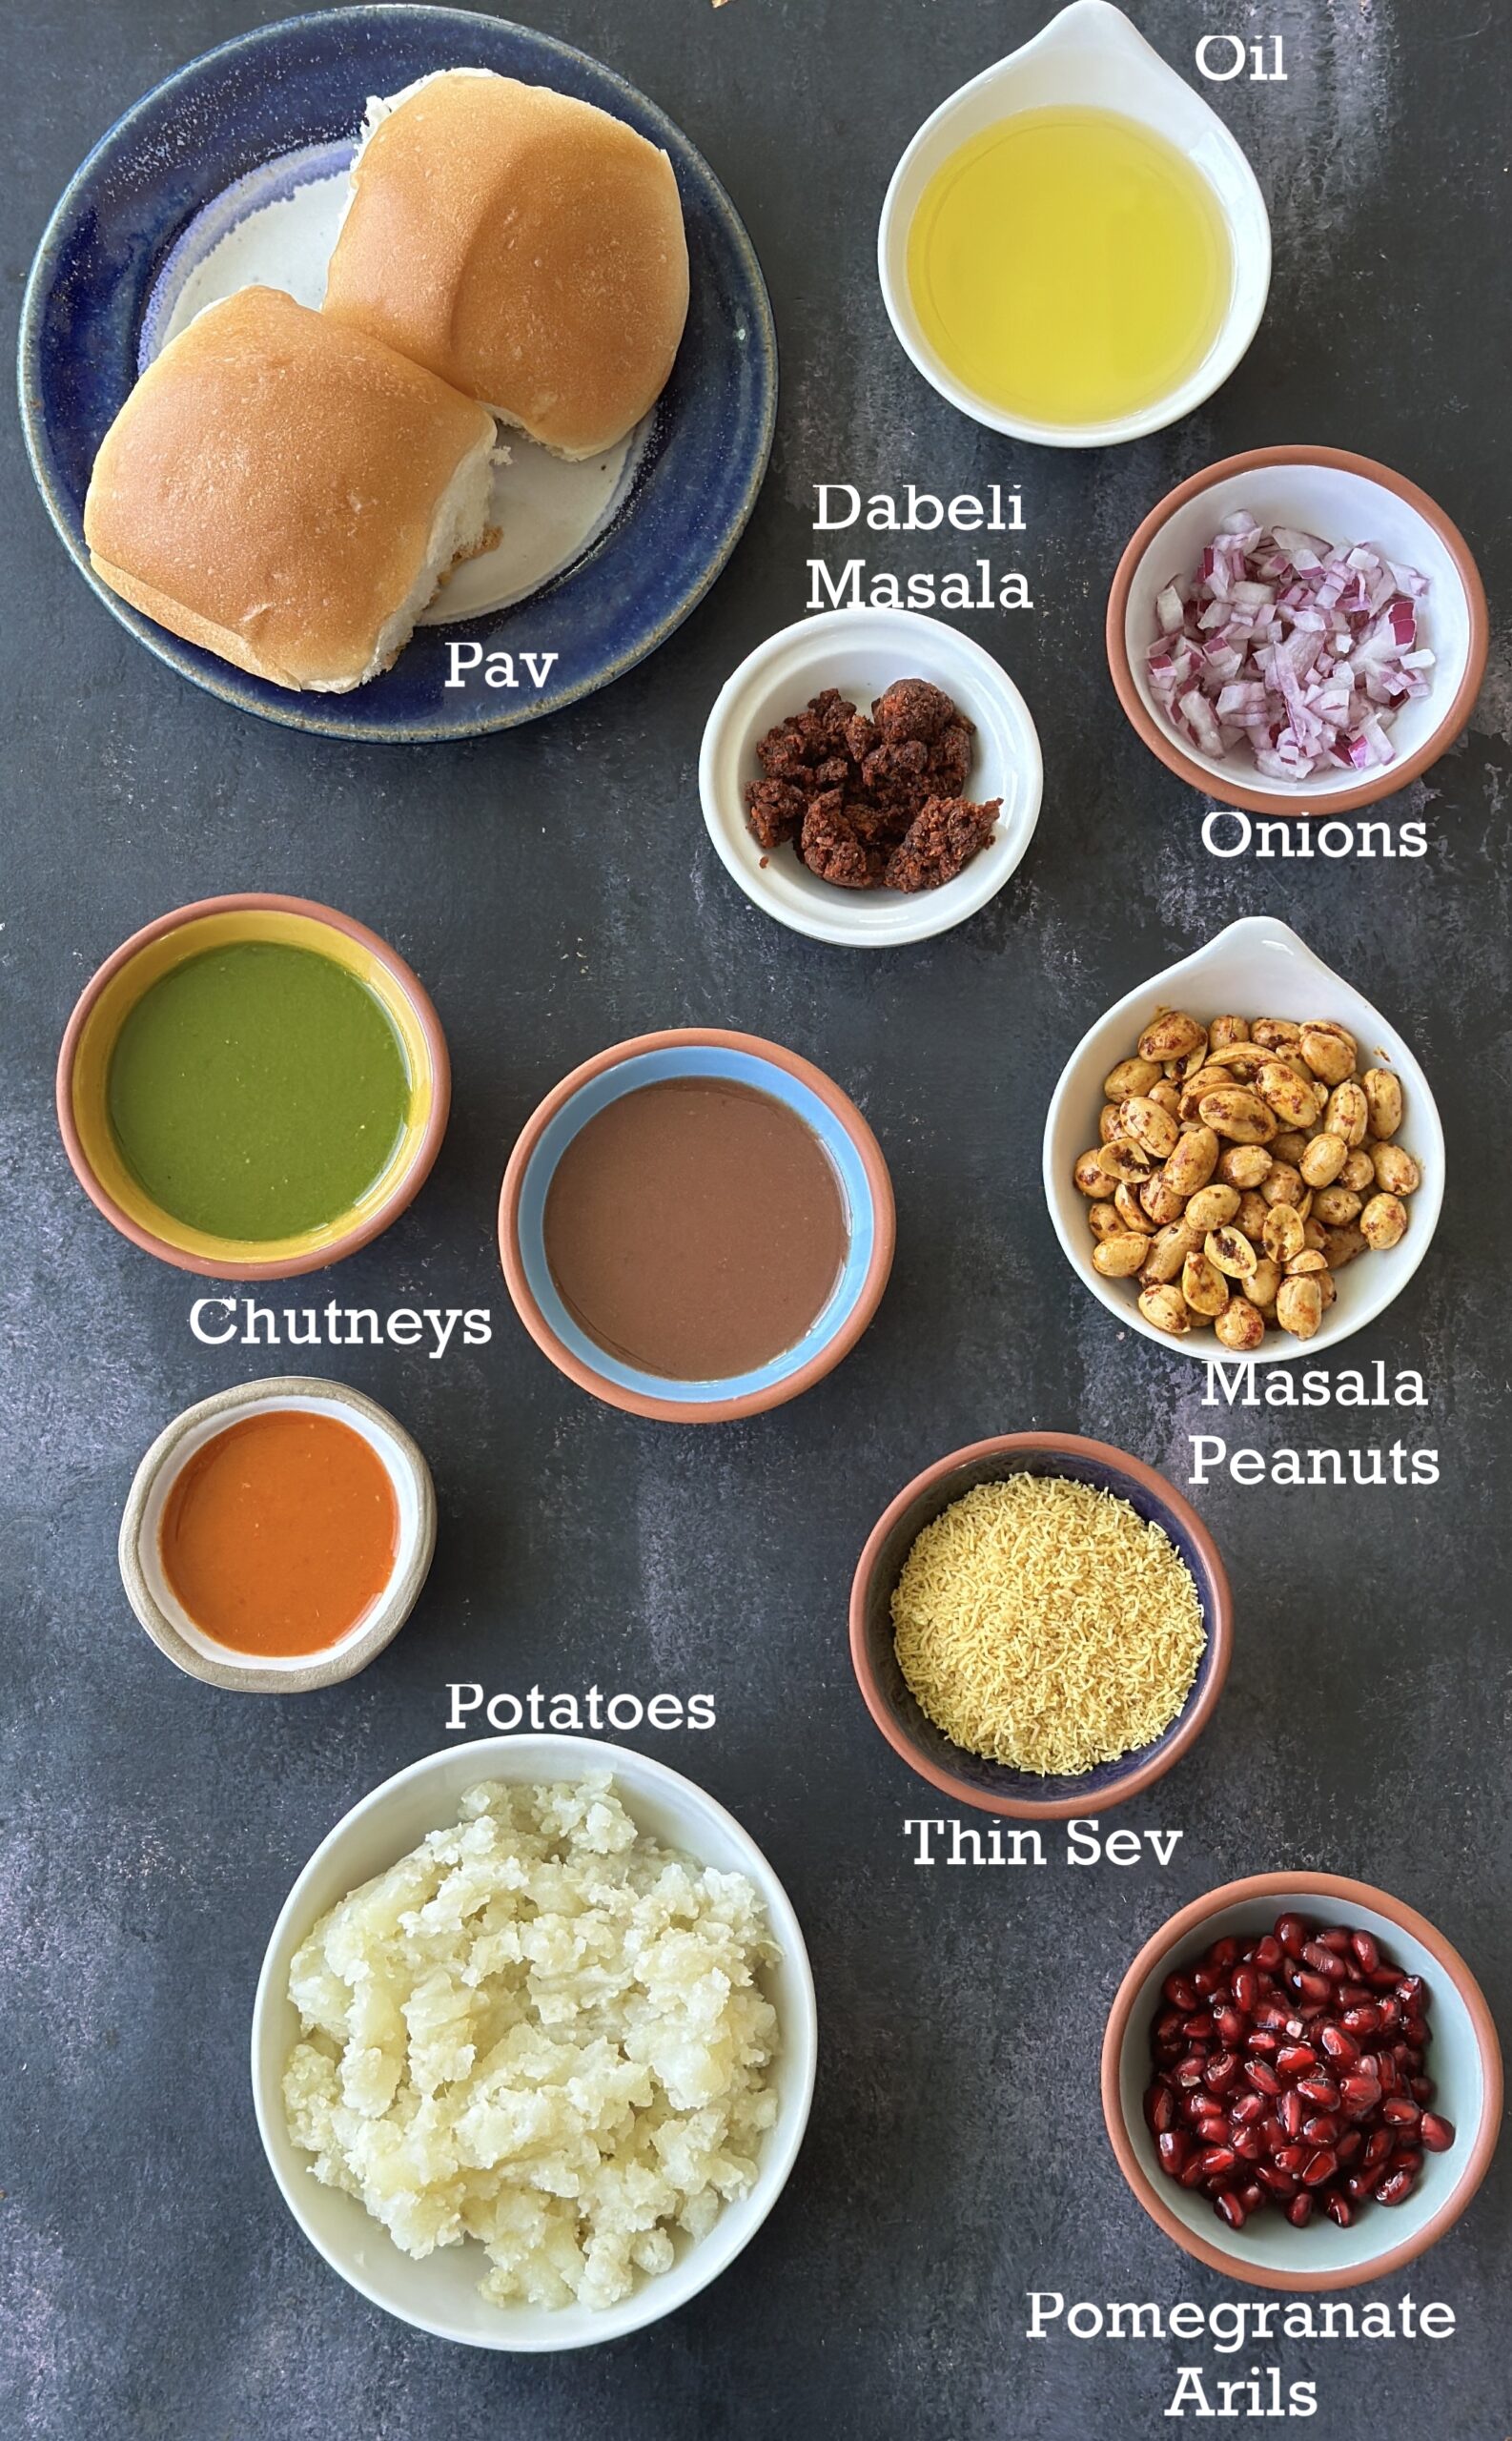 Ingredients for Kutchi Dabeli; bread, potatoes, seasonings and toppings on a dark background. 